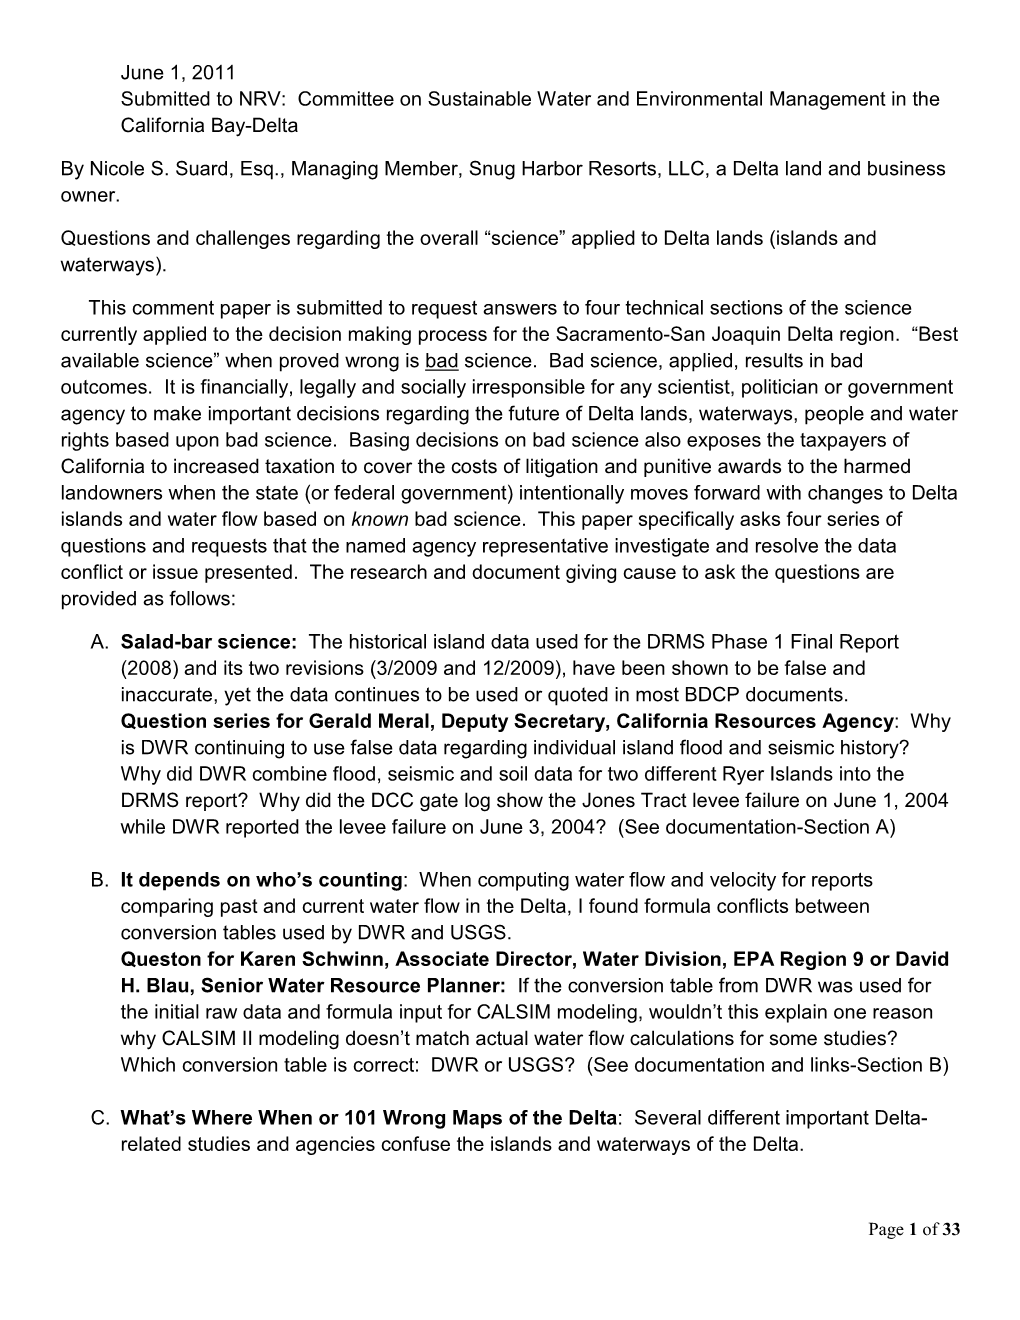 June 1, 2011 Submitted to NRV: Committee on Sustainable Water and Environmental Management in the California Bay-Delta